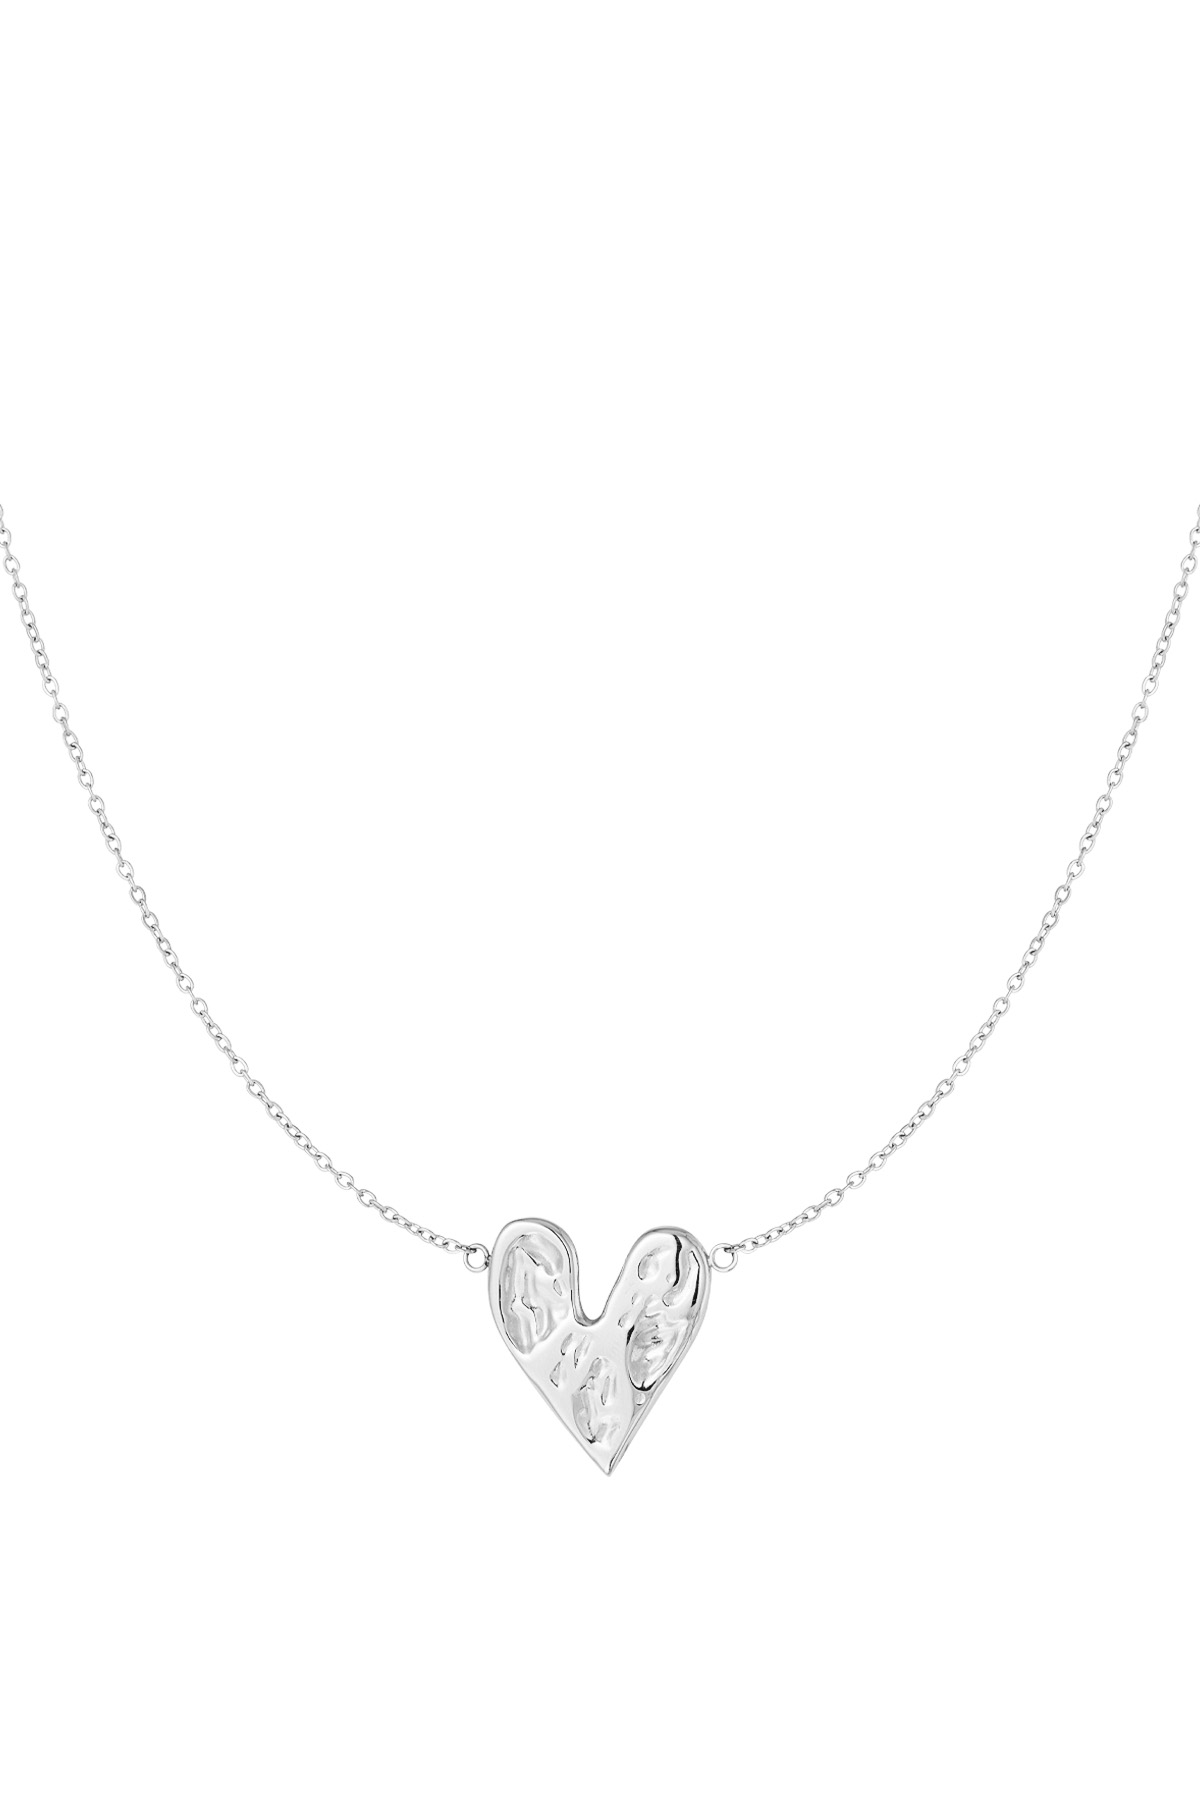 Necklace my love - silver